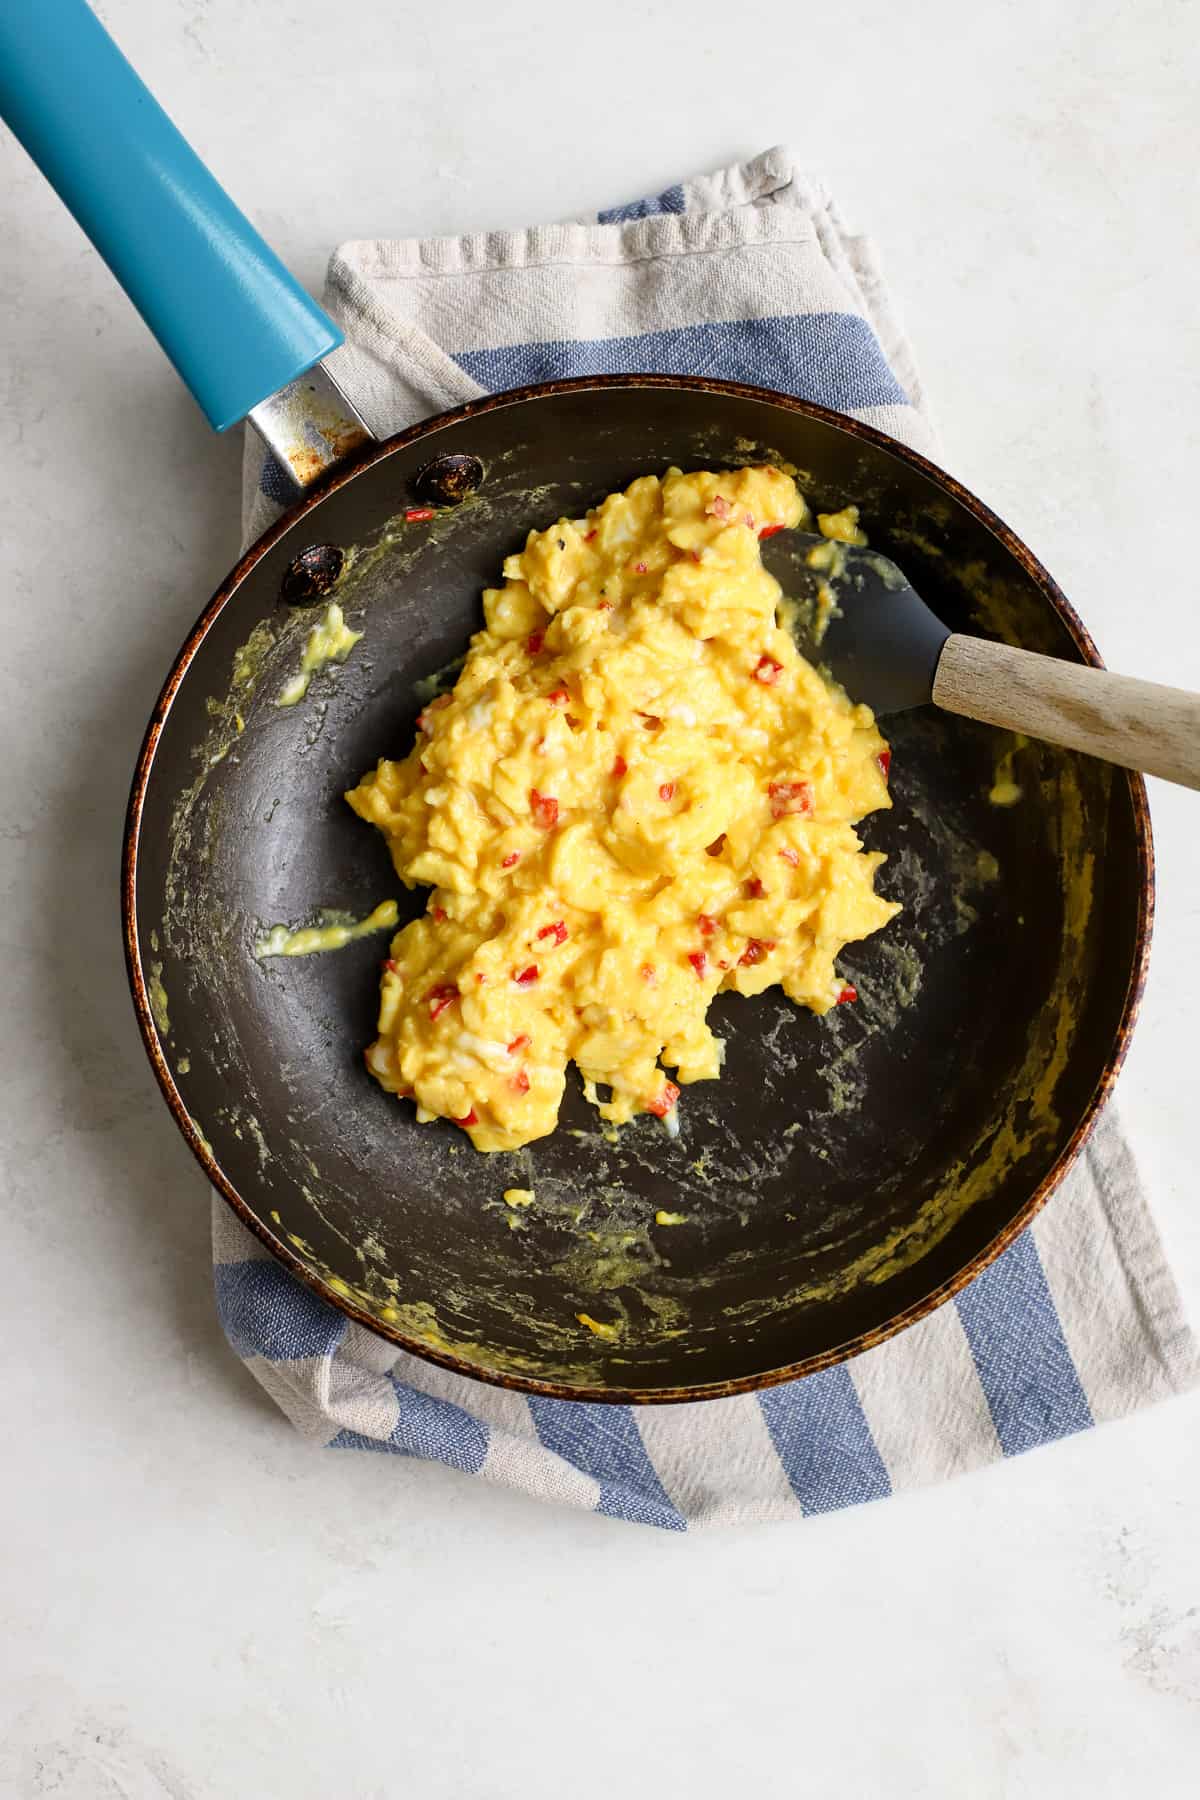 Soft, creamy chilli scrambled eggs in small blue sauté pan on blue and white striped towel on light gray surface.